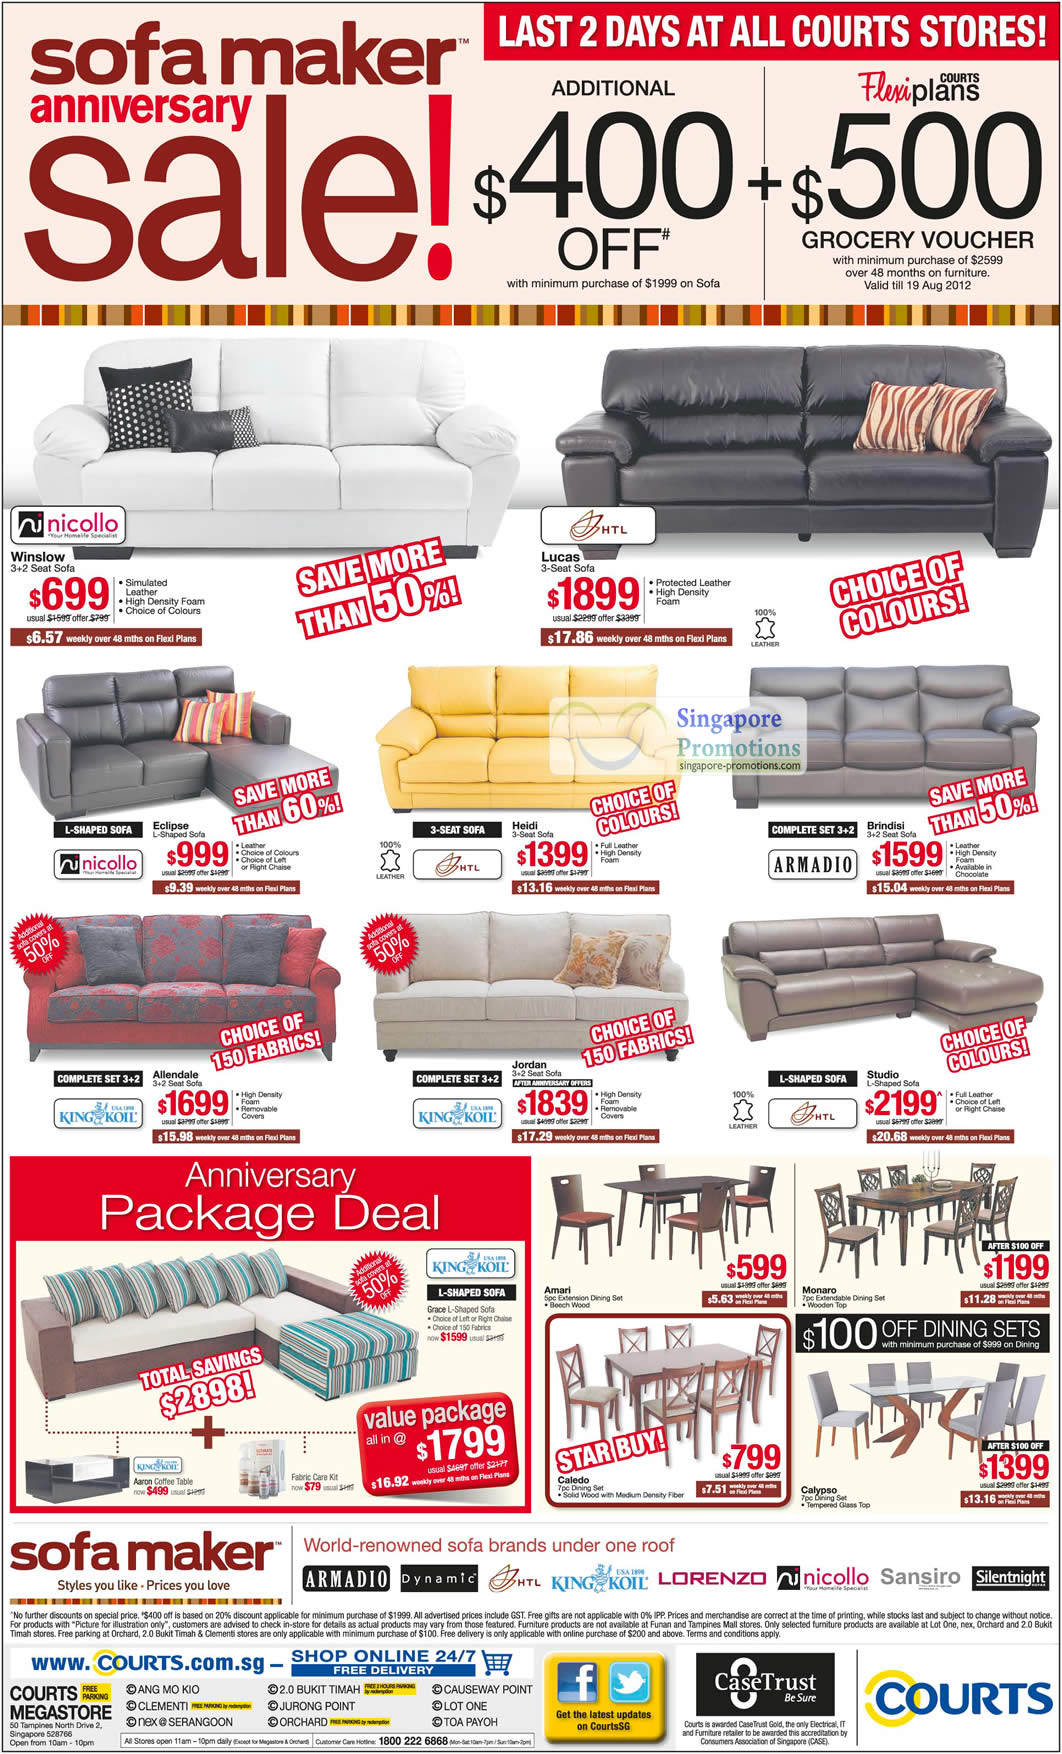 Featured image for Courts Mega Raya Sale Promotion Offers 14 - 20 Jul 2012